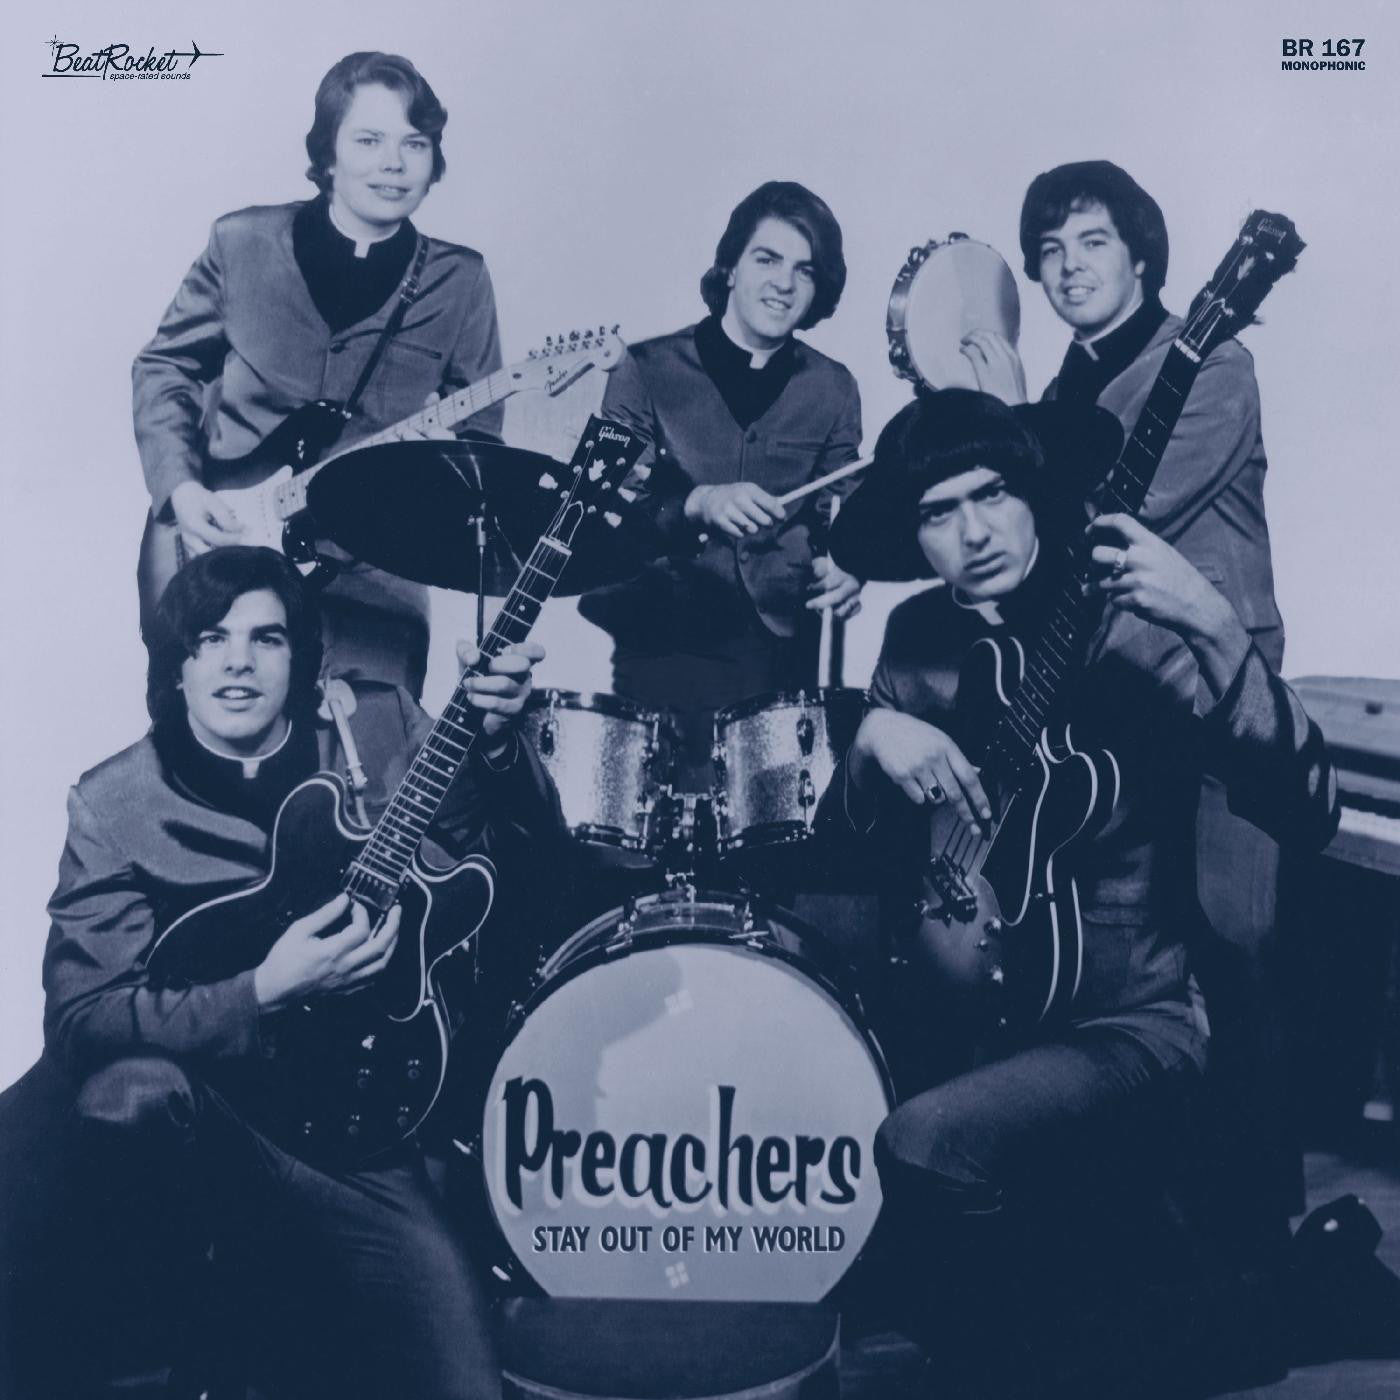 Preachers - Stay Out of My World (Vinyl LP)